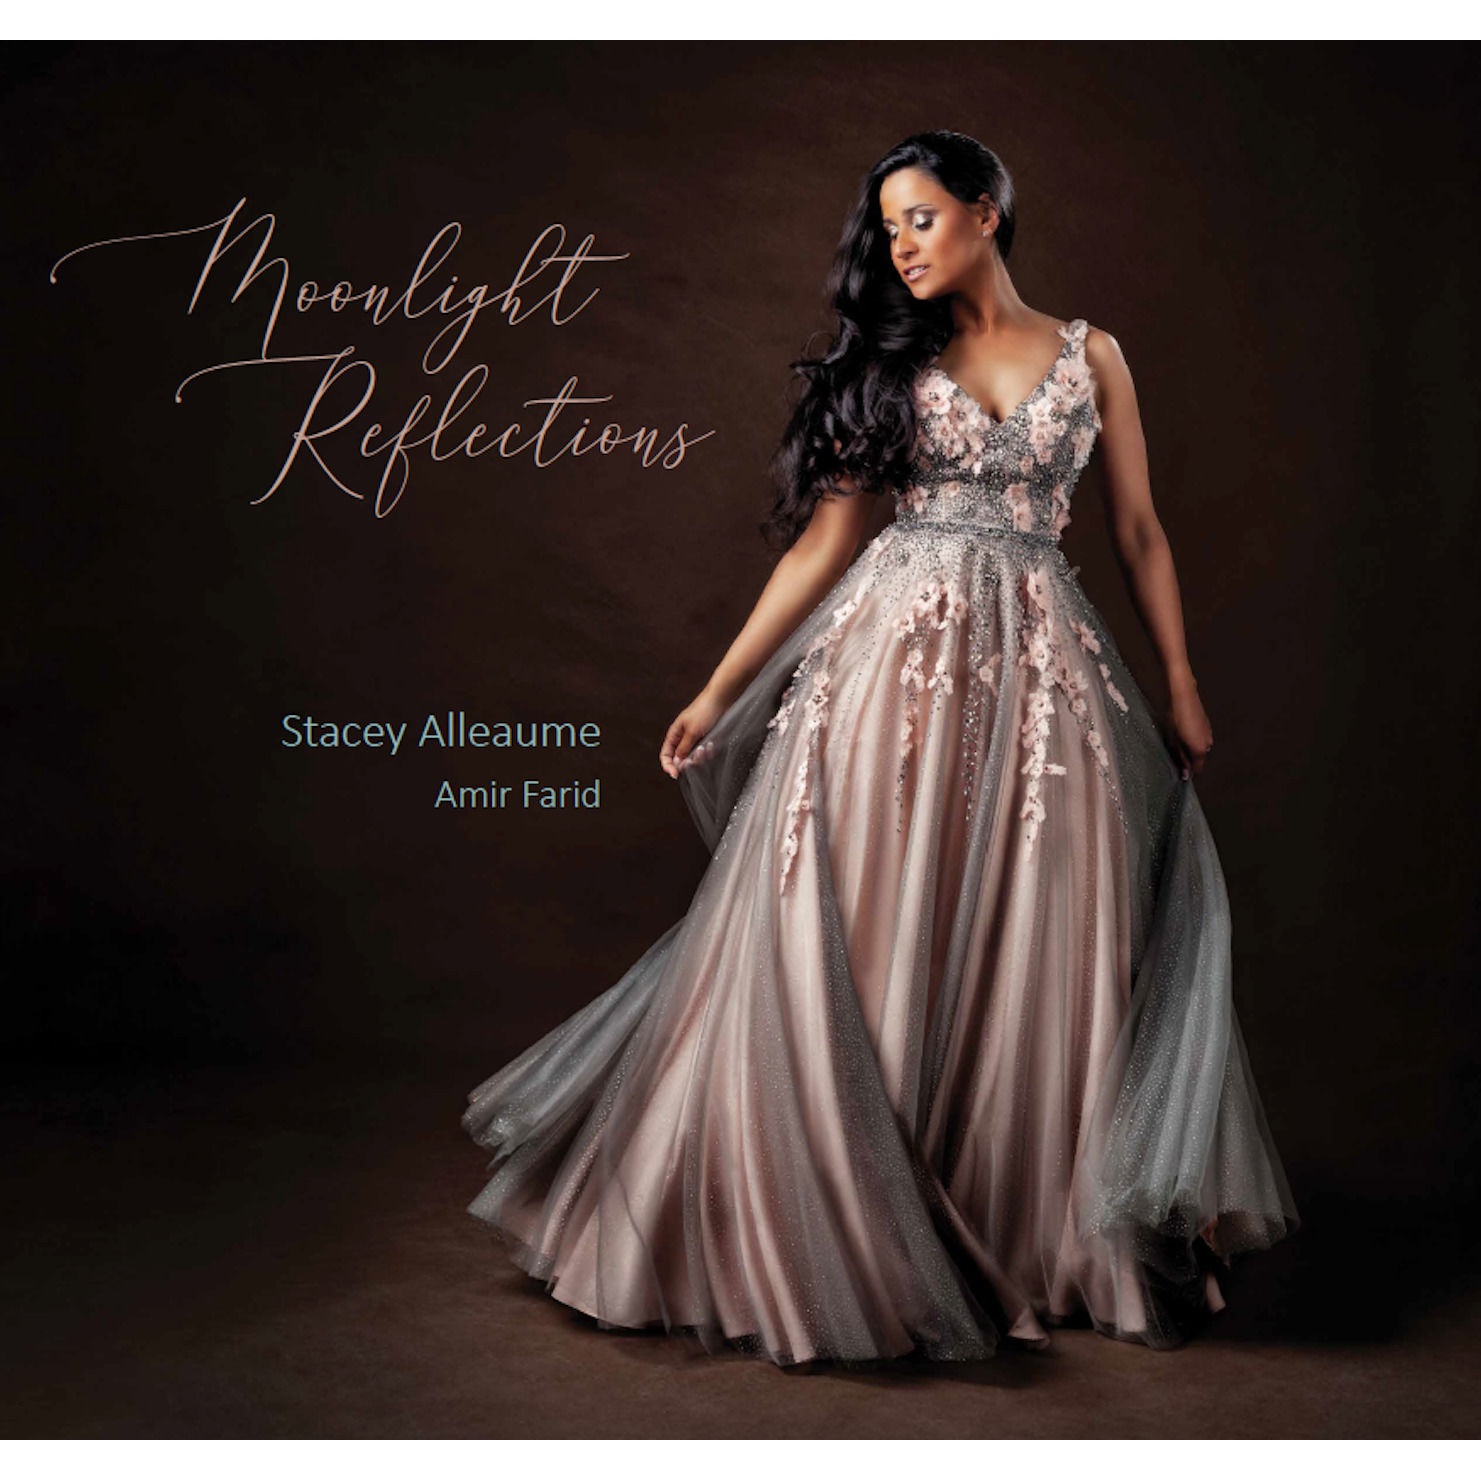 Stacey Alleaume & Amir Farid - Moonlight Reflections (2021) [FLAC 24bit/48kHz]